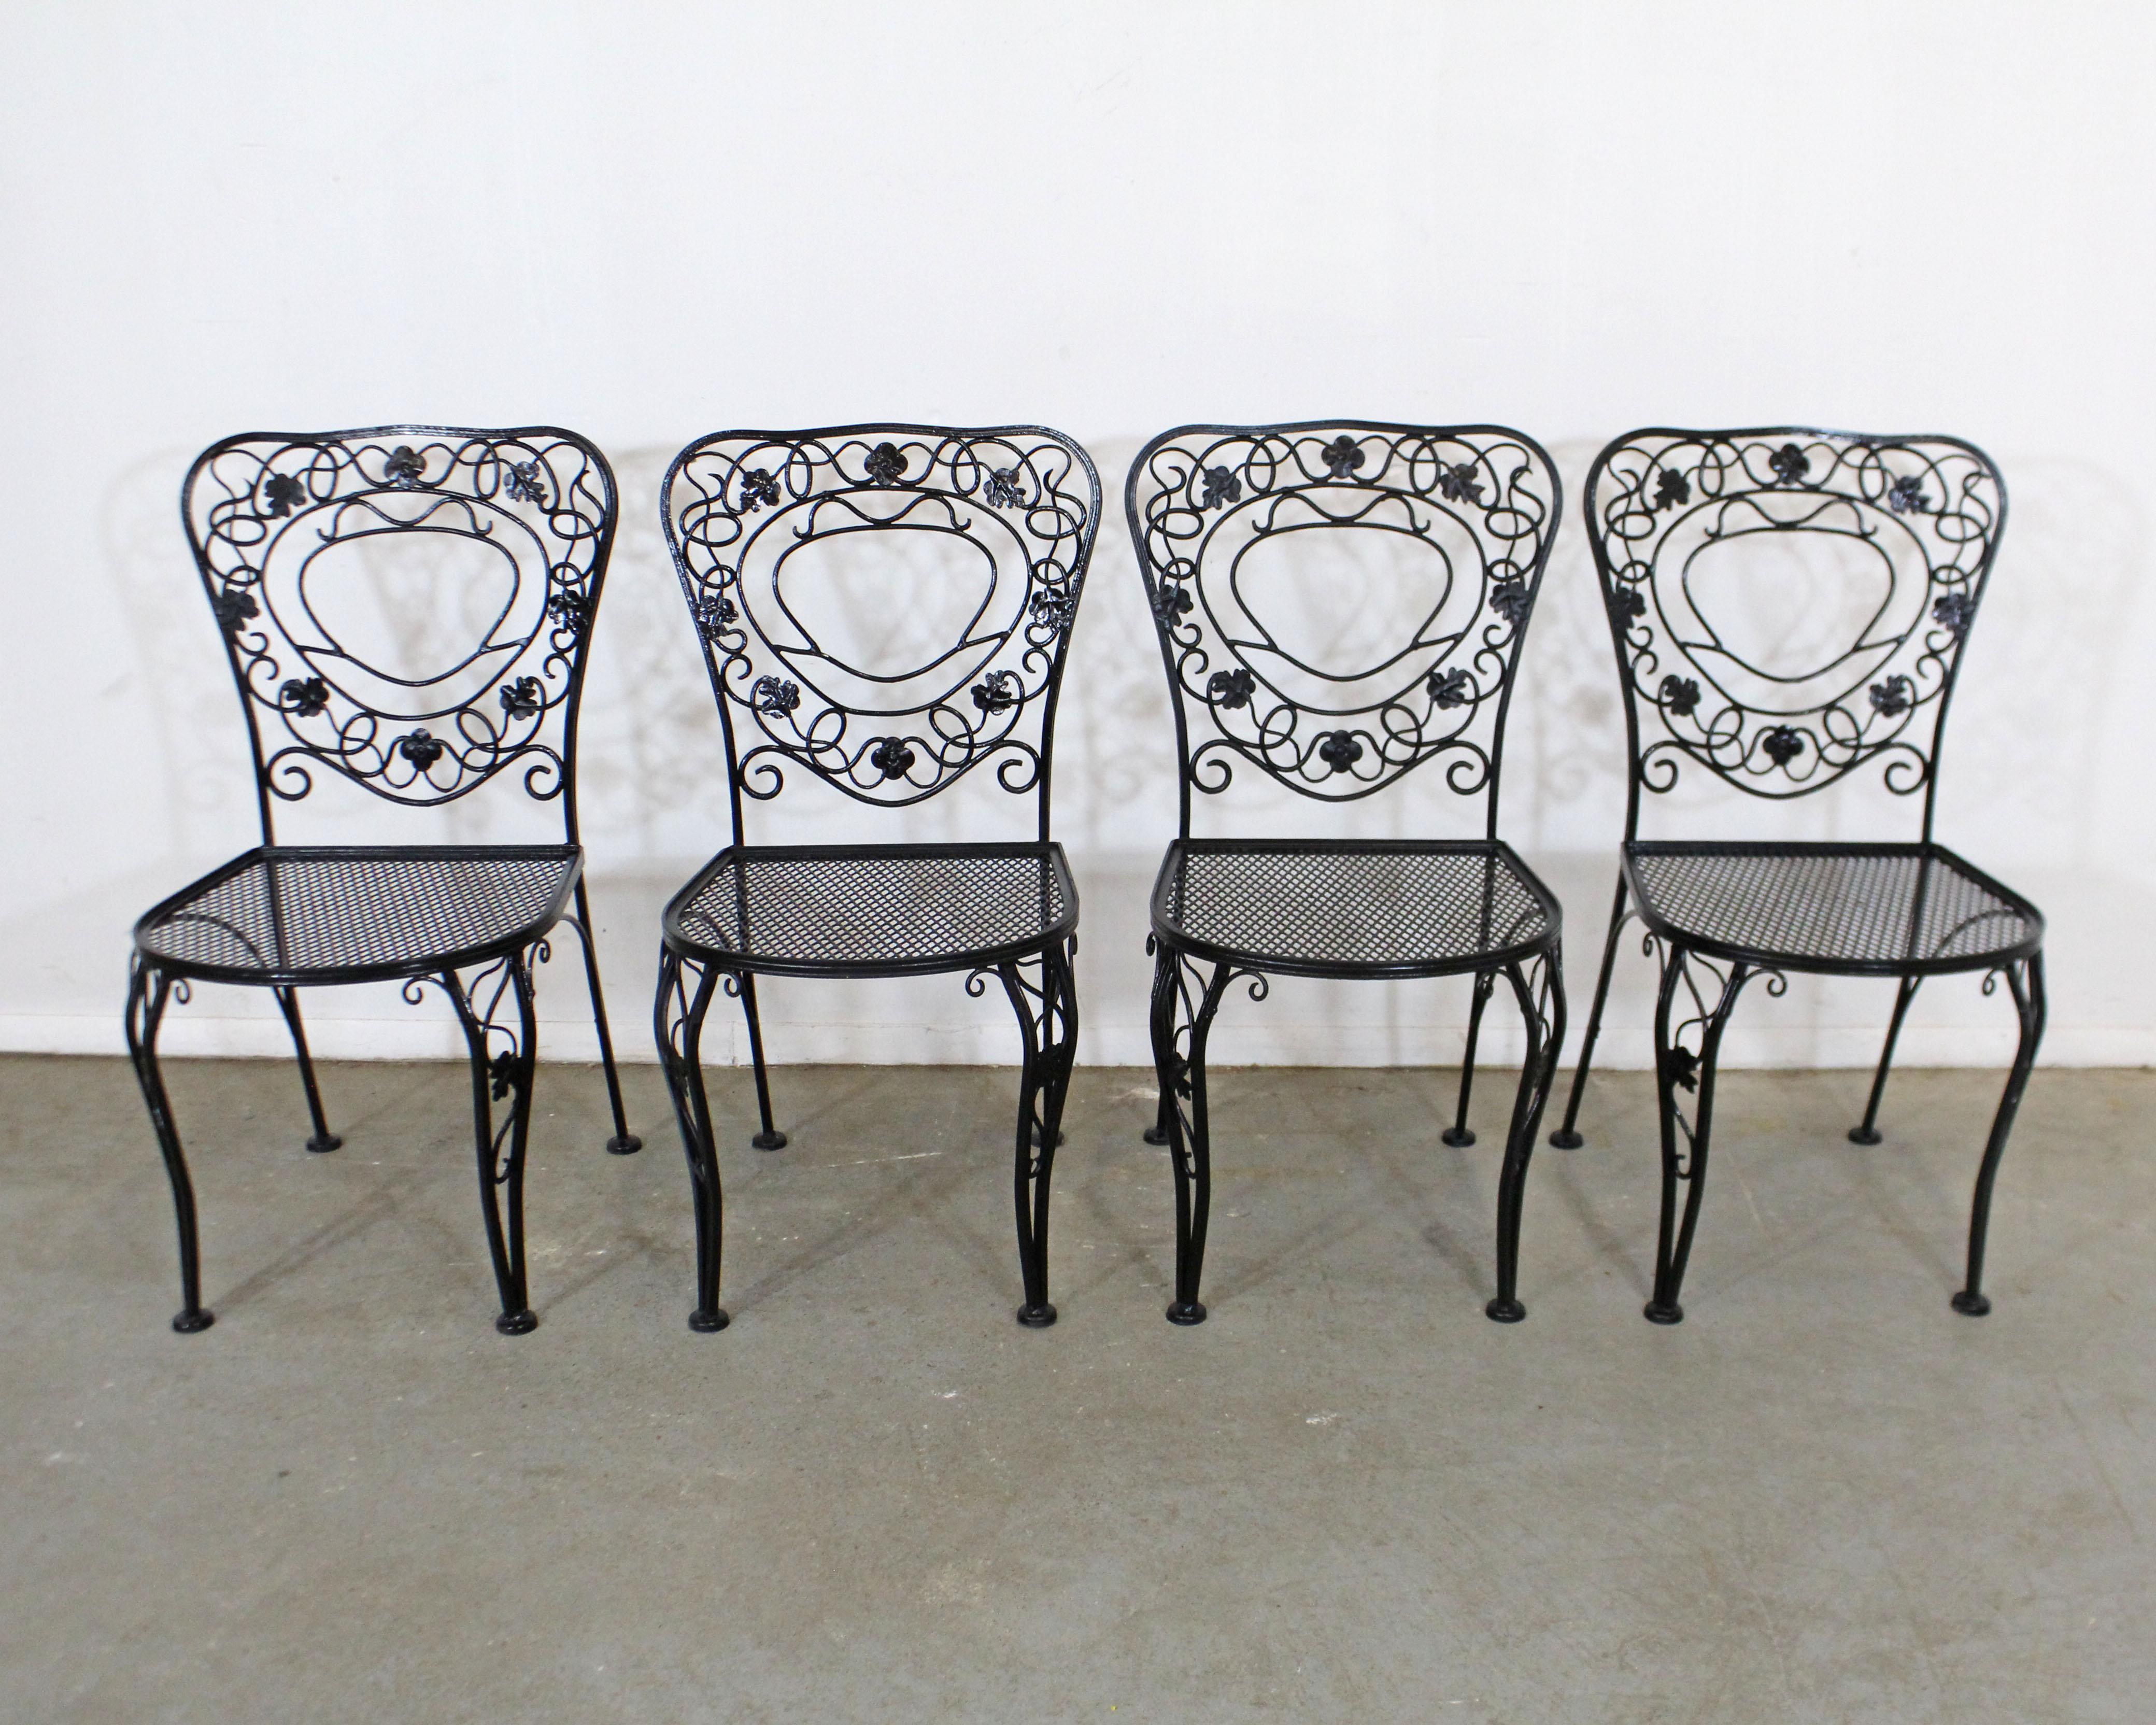 What a find. Offered is a set of 4 vintage wrought iron patio side chairs with dogwood leaf designs on the backs, curved legs, and mesh seats. Perfect for an outdoor patio space! The chairs are in good condition with some age wear. No cushions